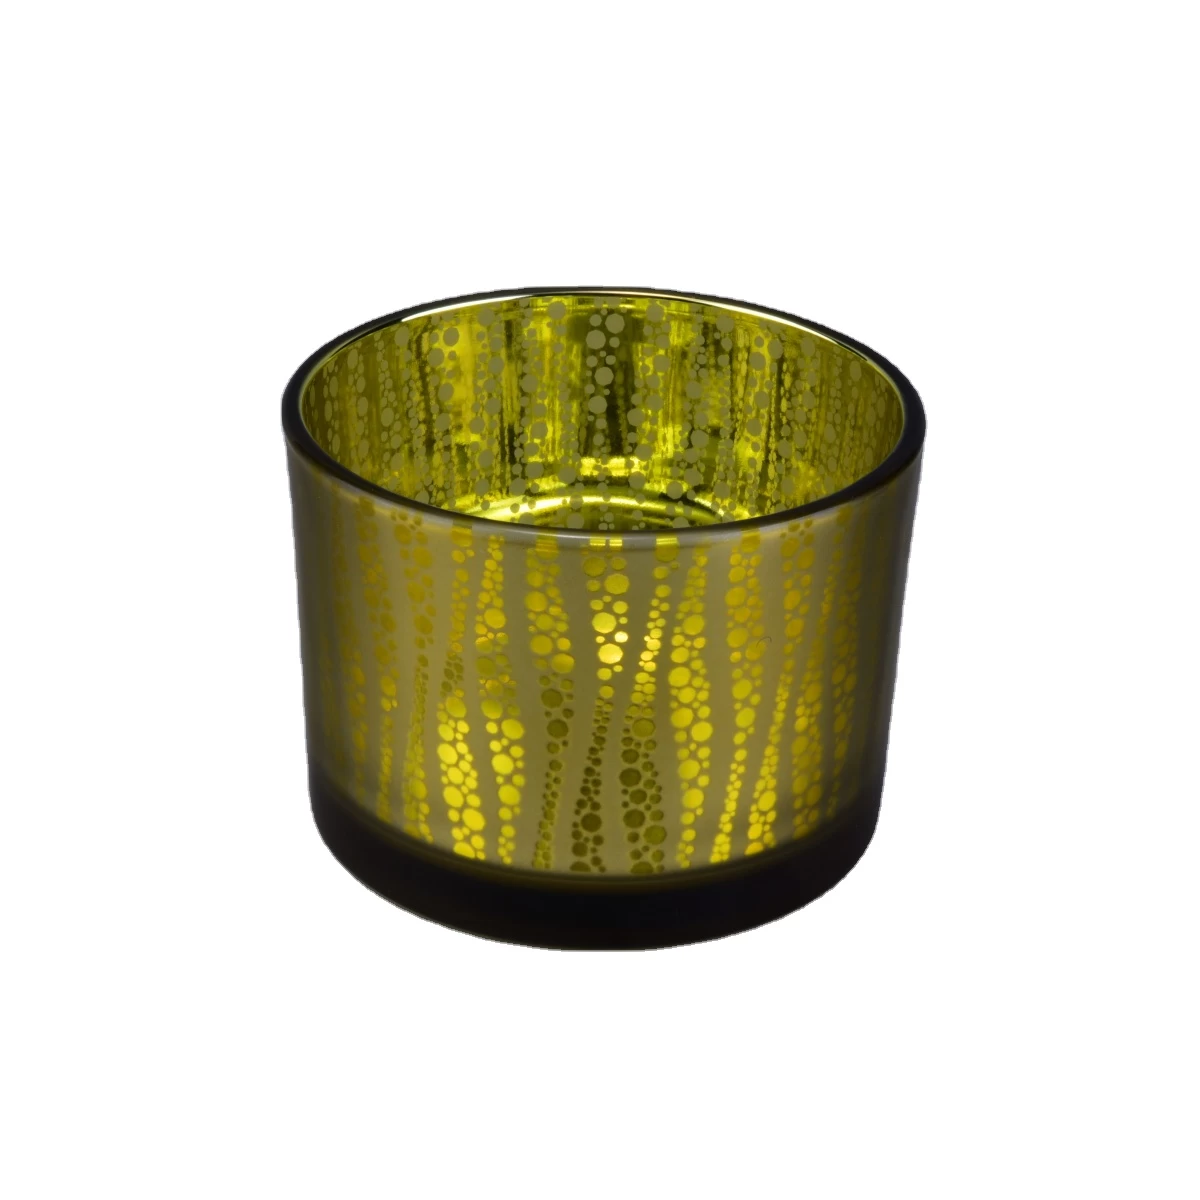 Manufacturers frosted gold luxury glass candle holder vessels